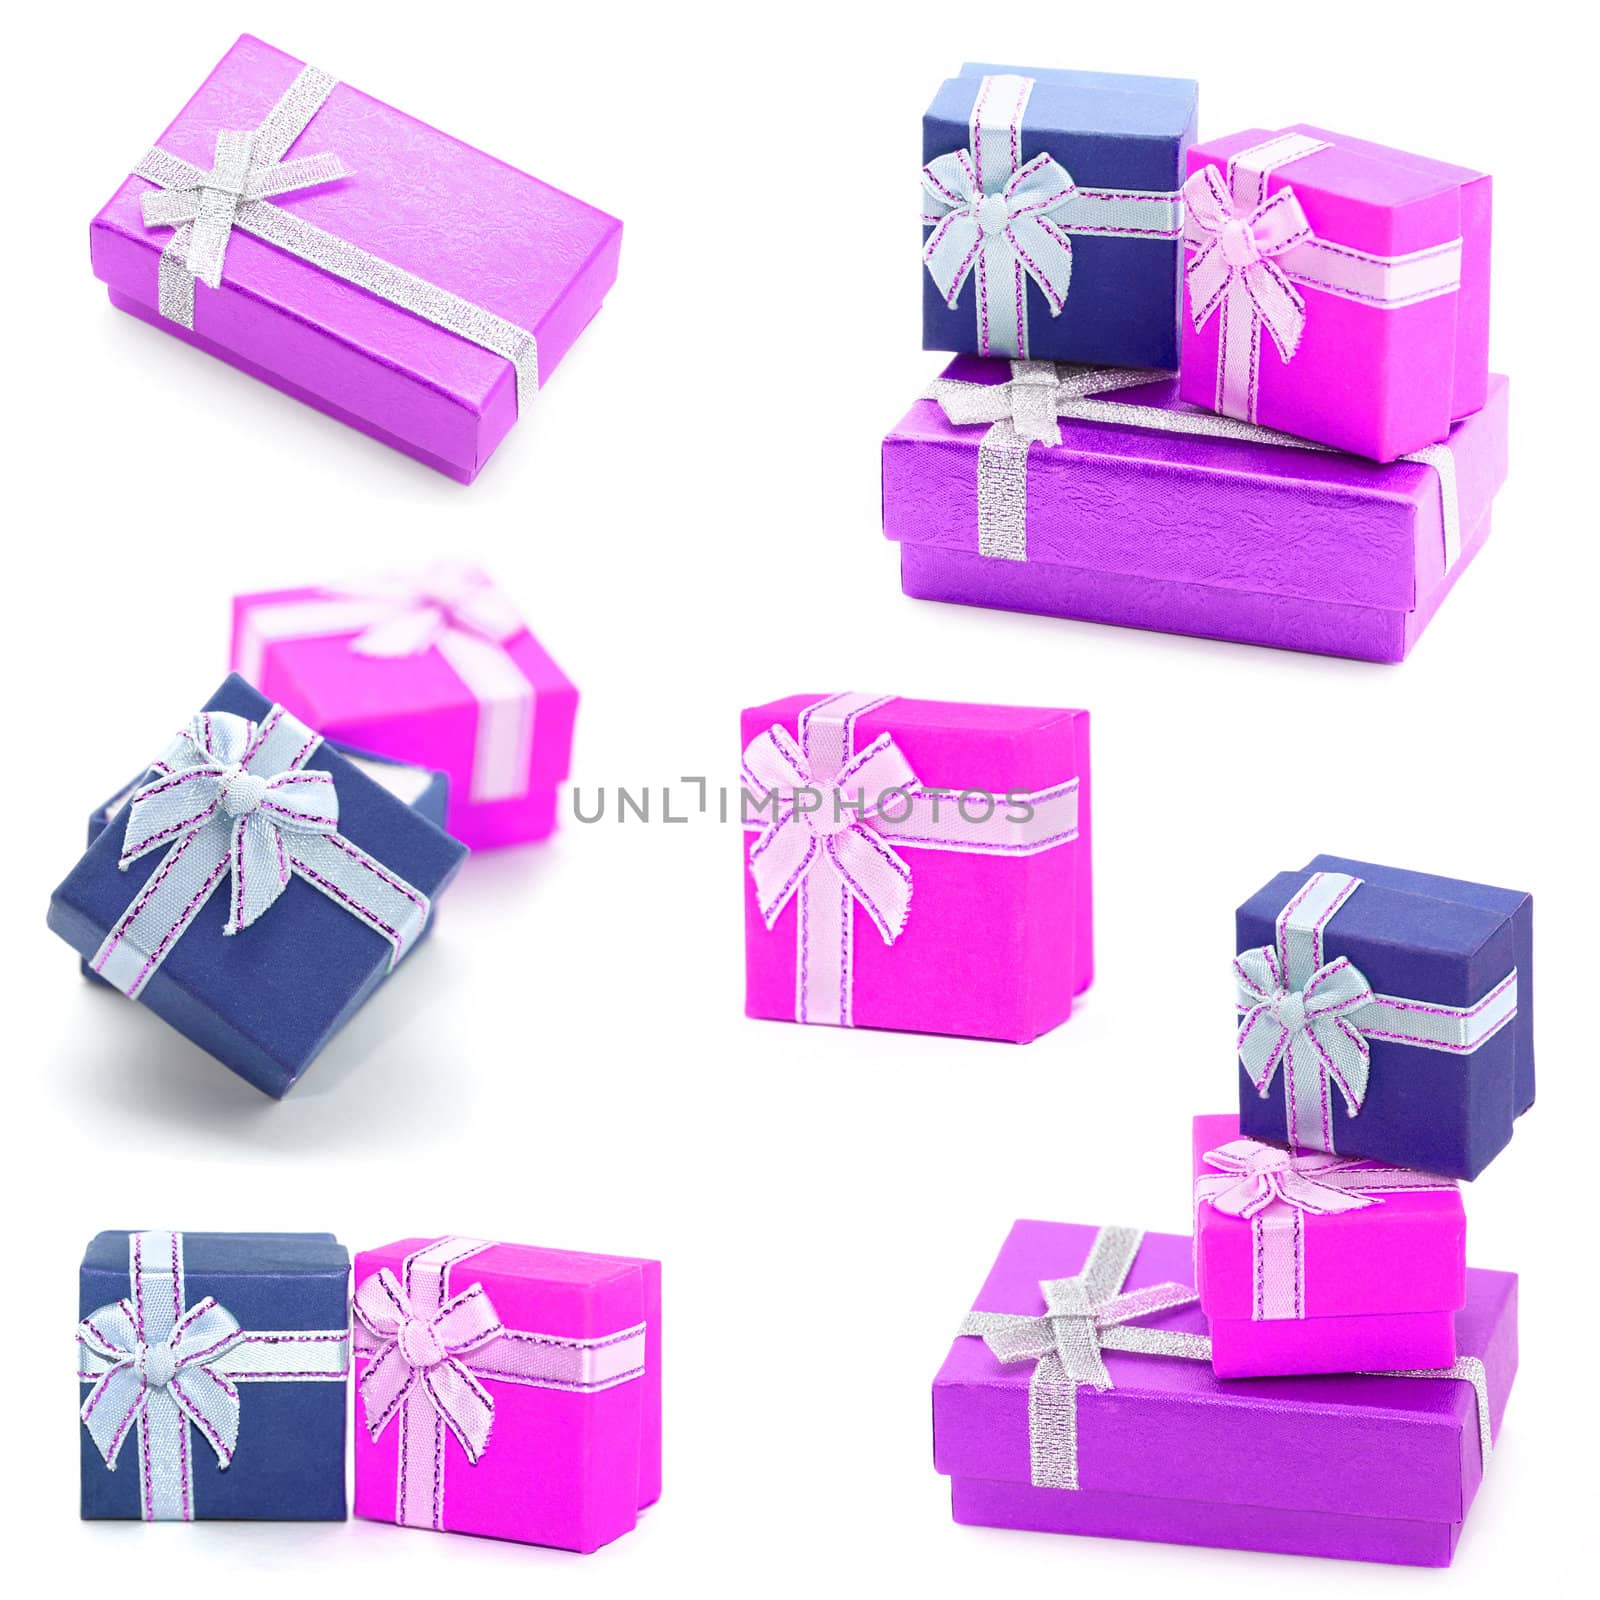 Gift boxes collection isolated on white background